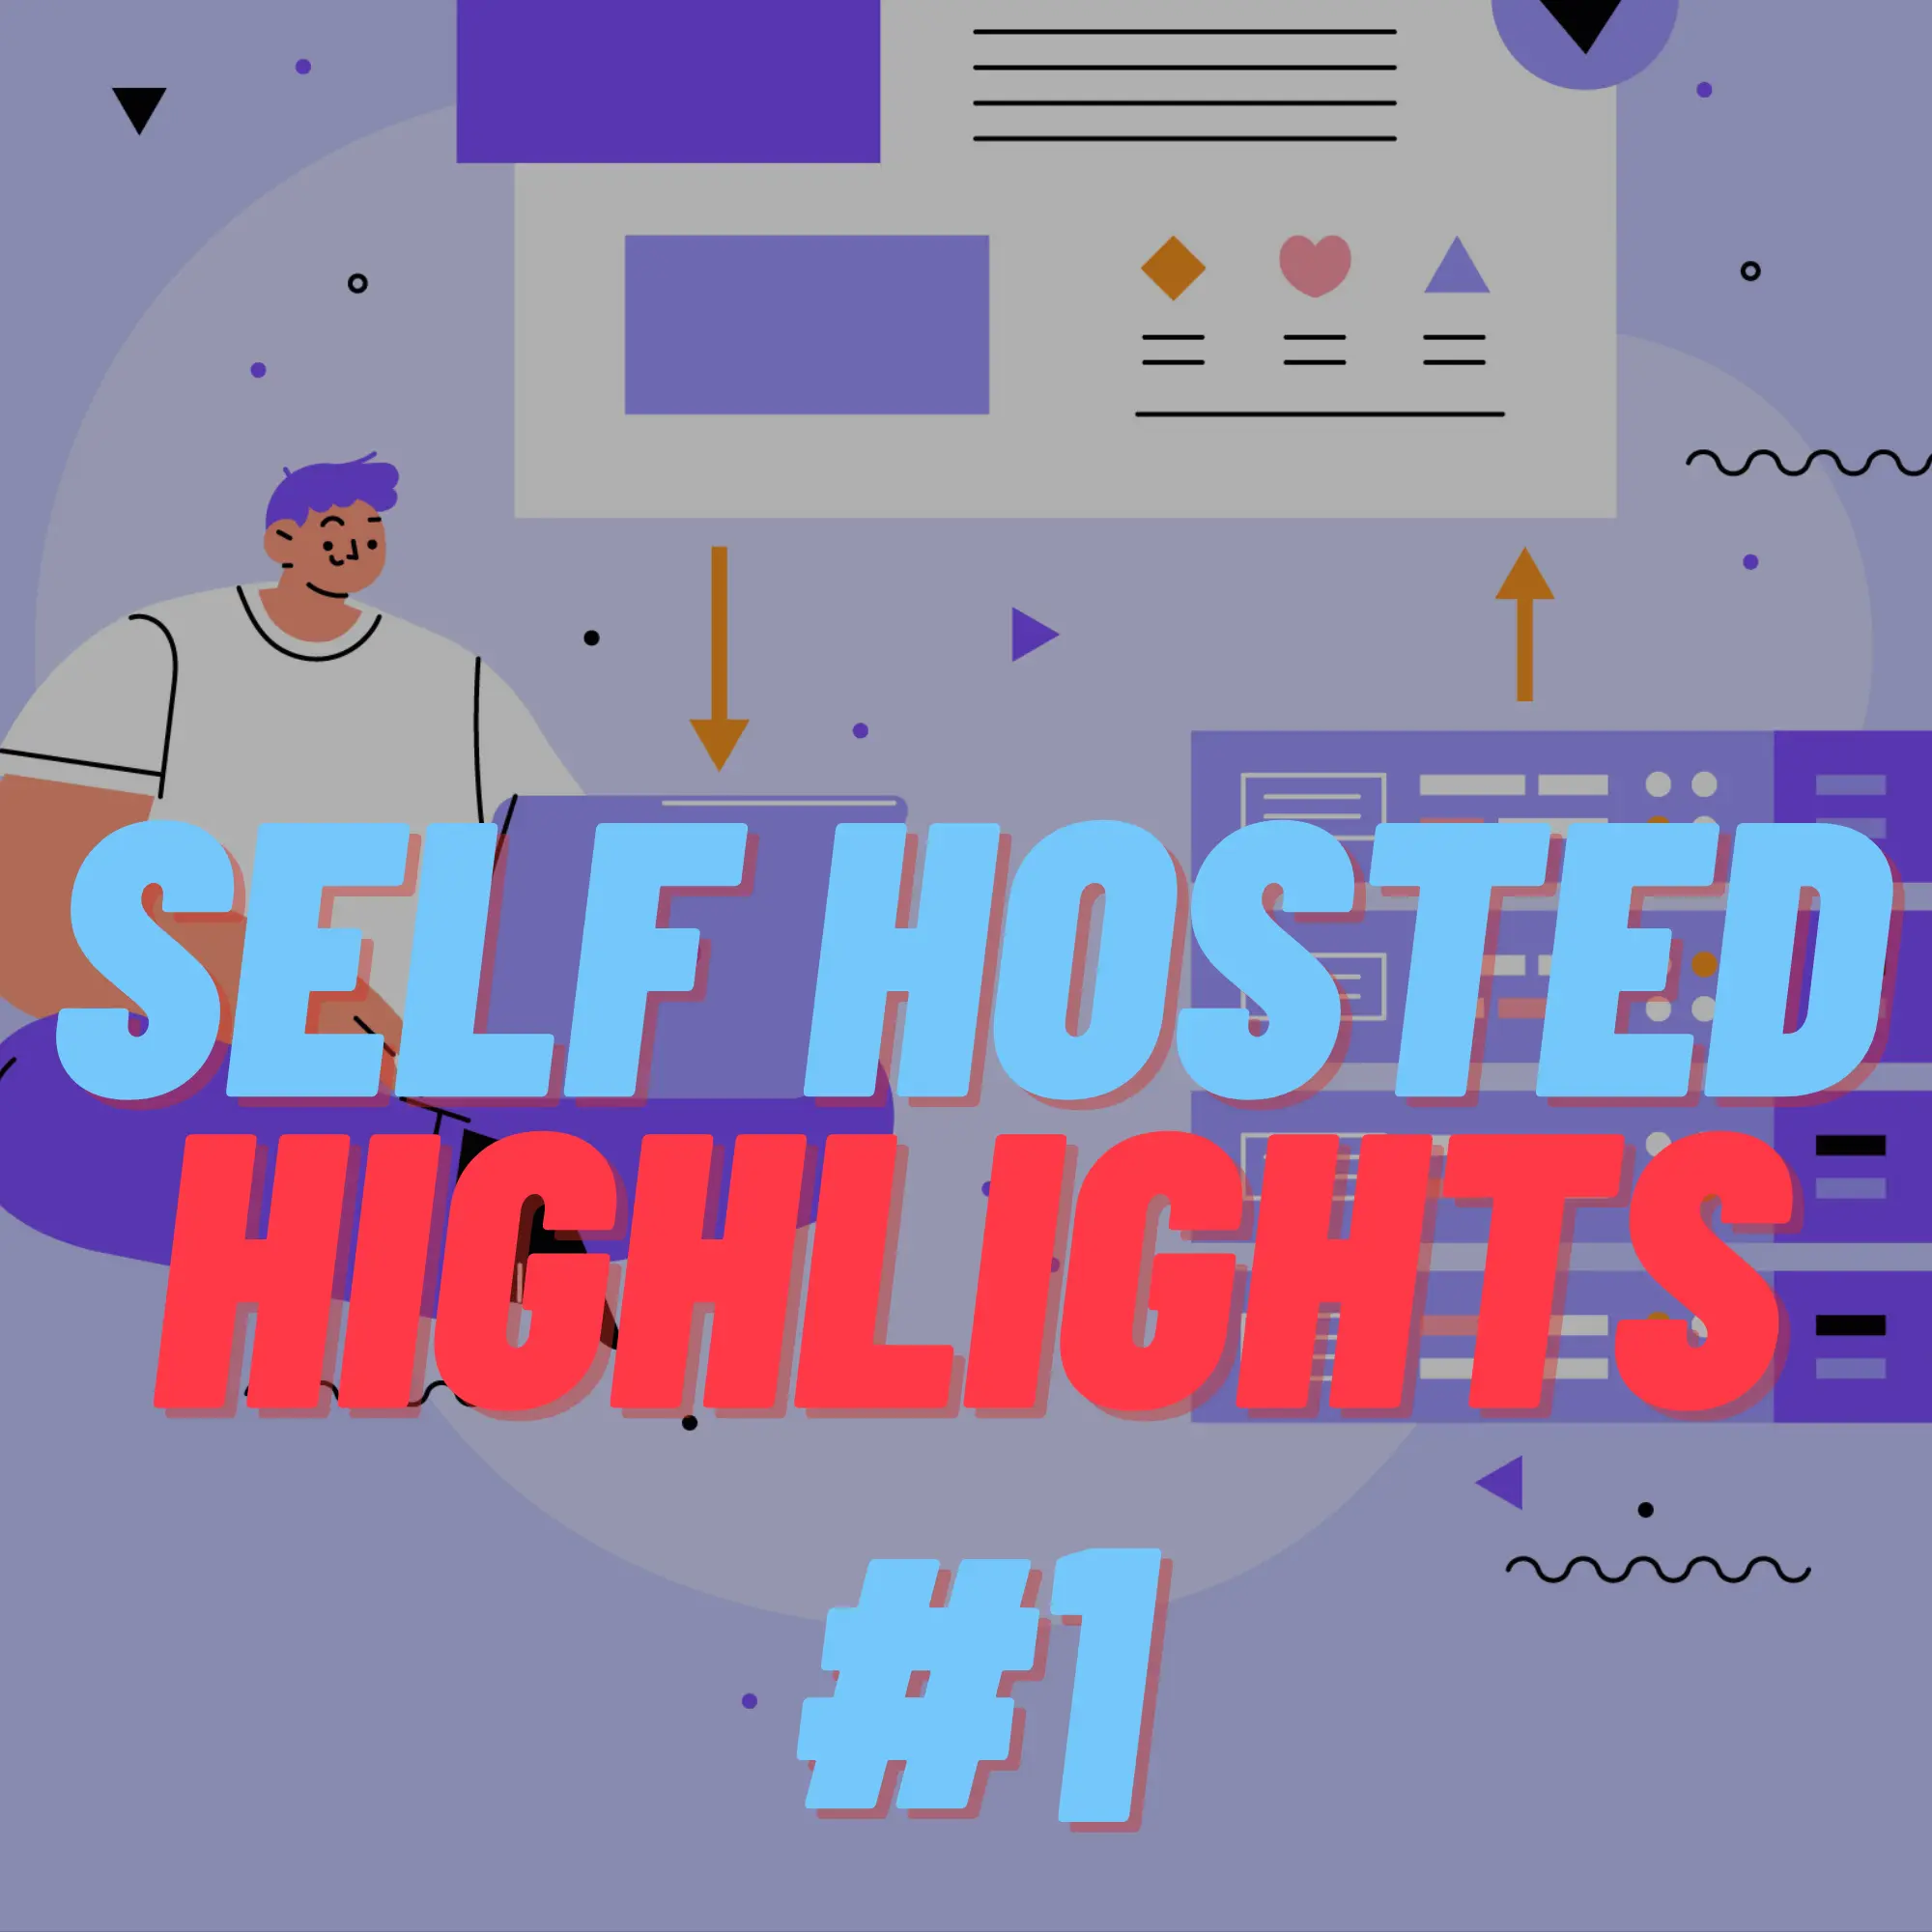 Self-Hosted Highlights #1